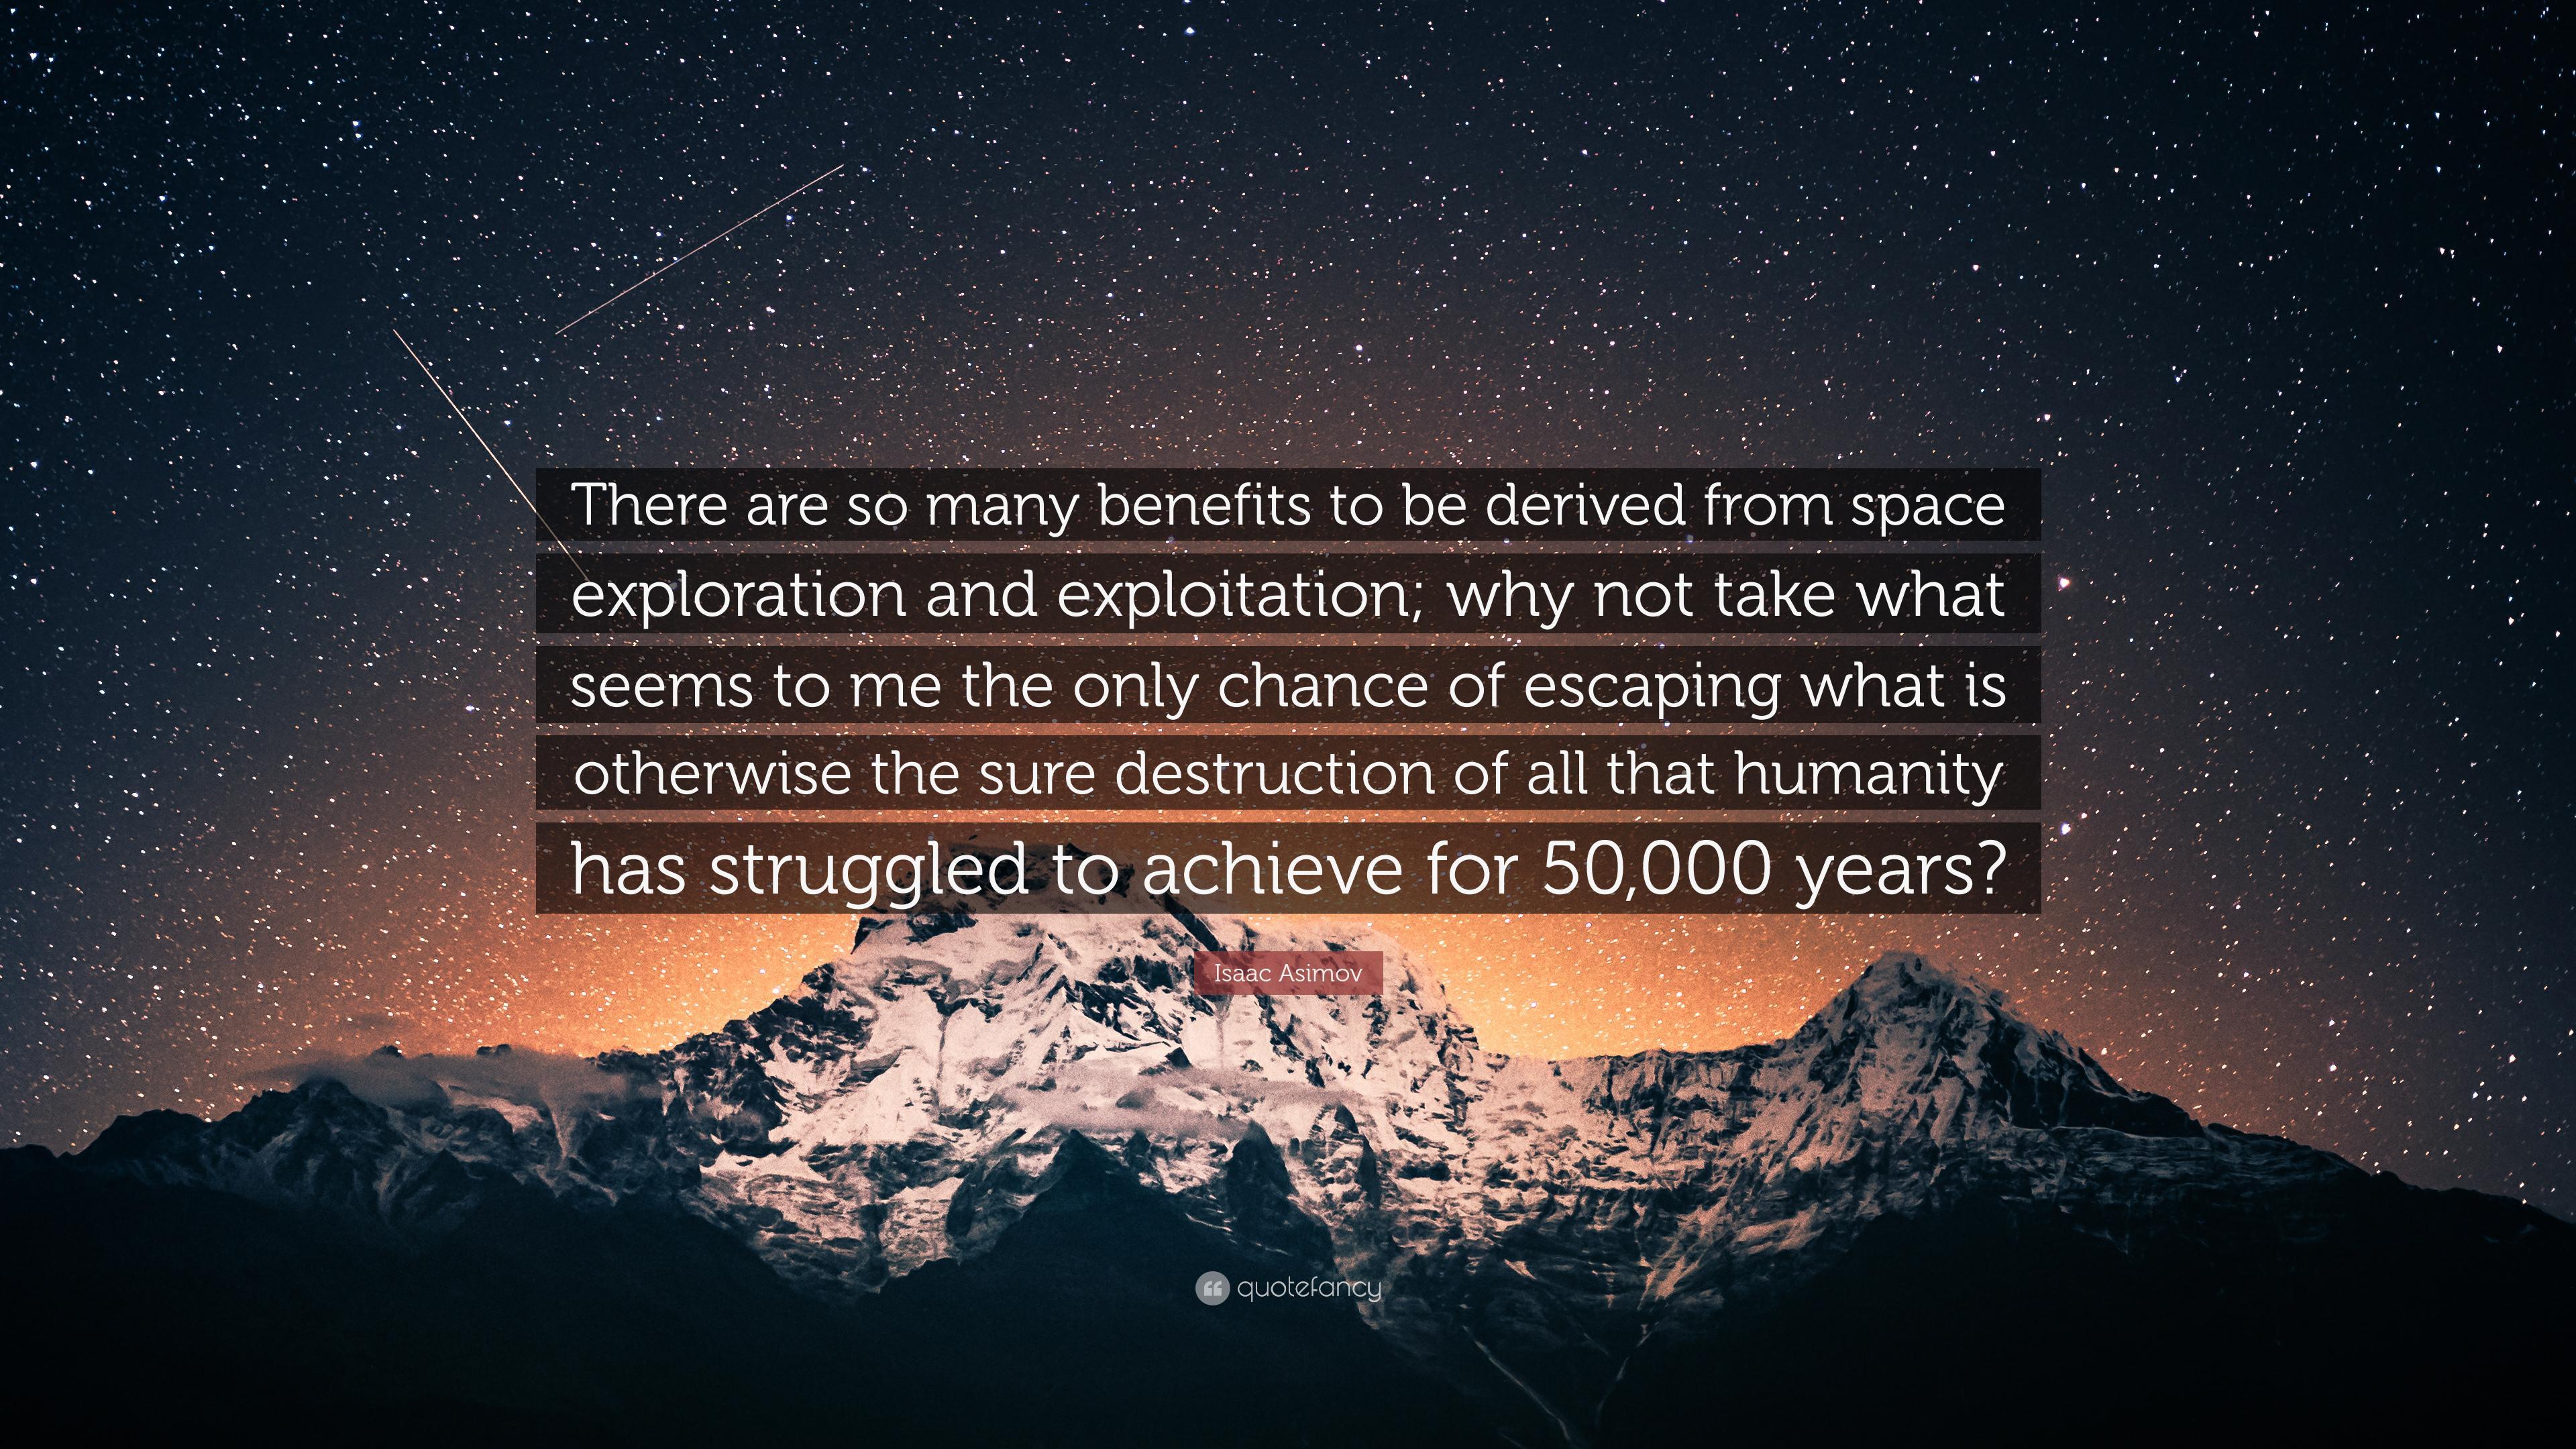 Isaac Asimov Quote: “There are so many benefits to be derived